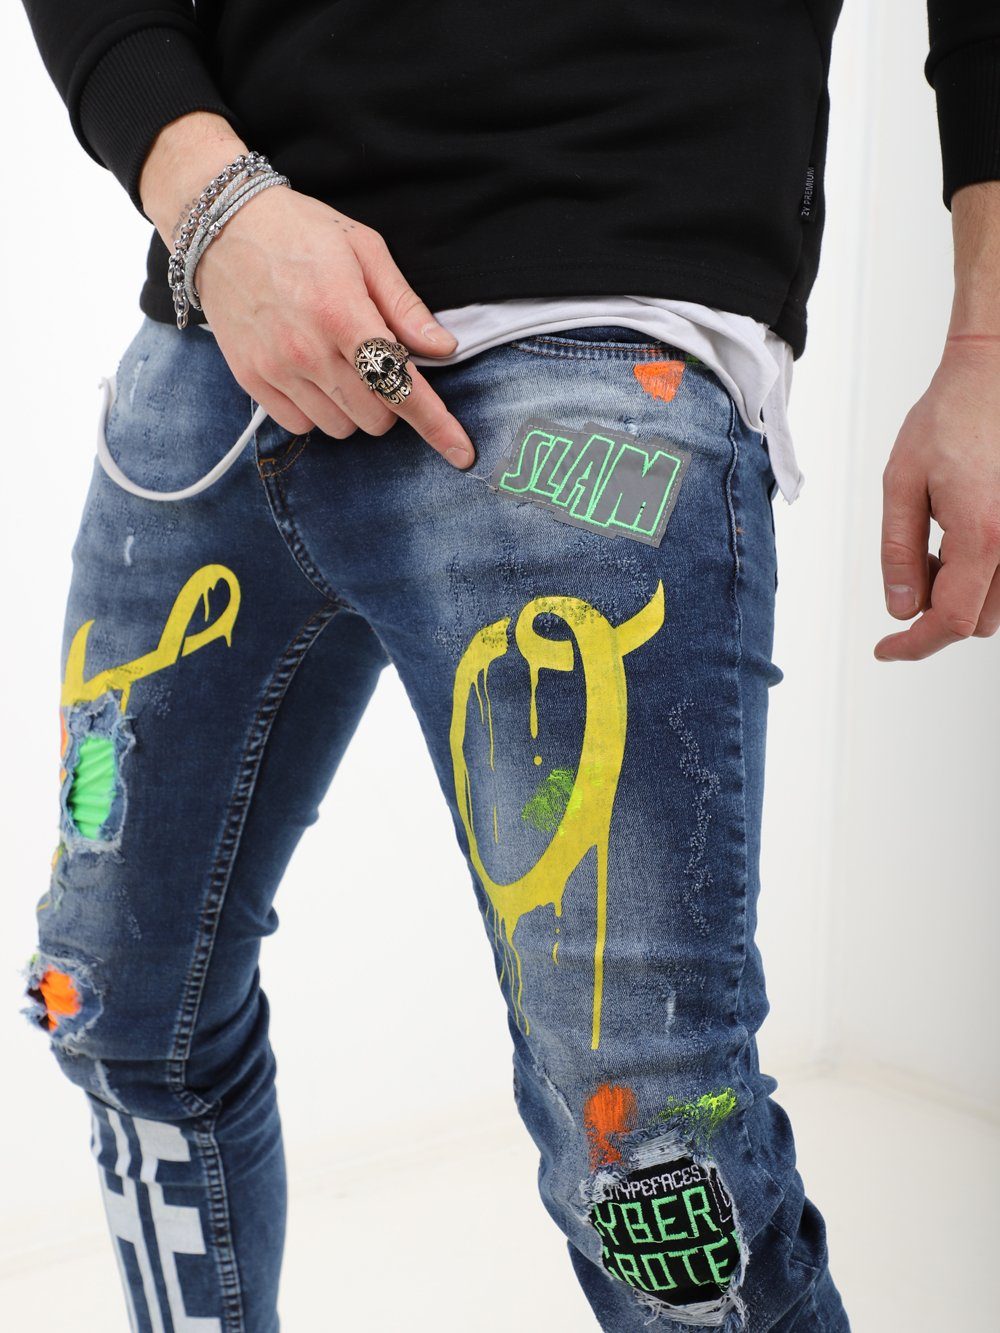 A man wearing a pair of MY WAY jeans with graffiti on them.